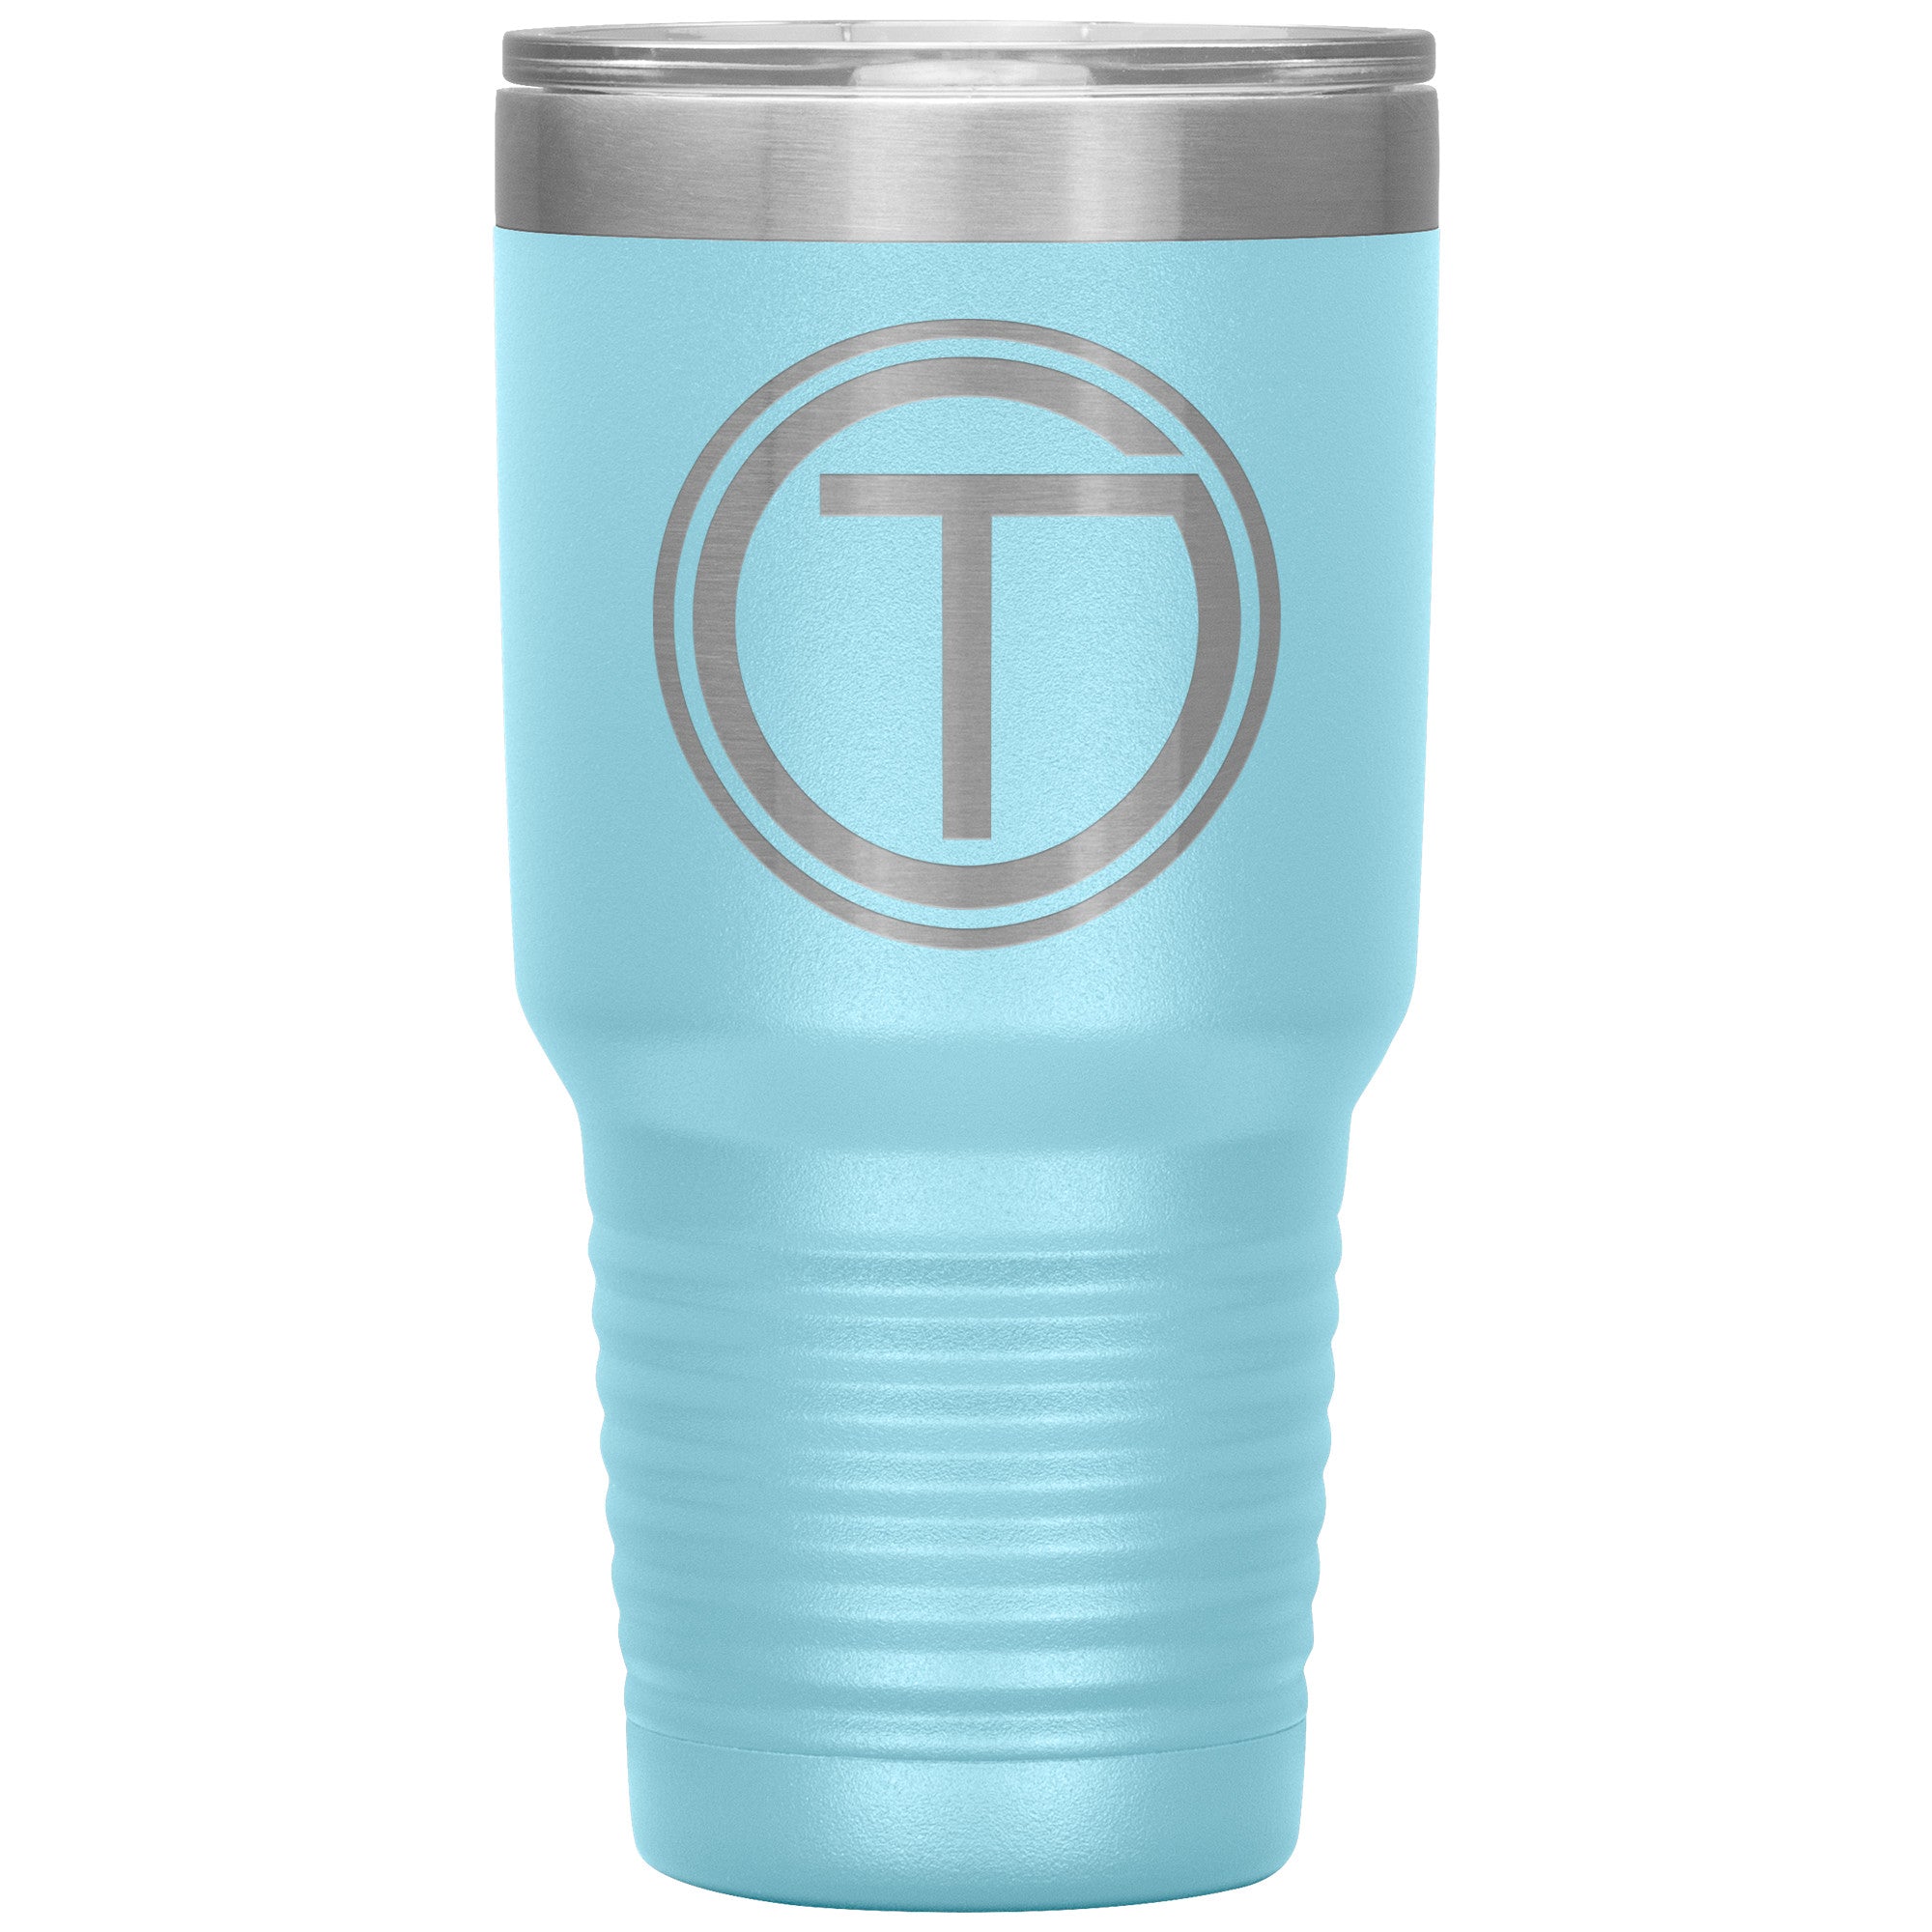 30oz Insulated Tumbler - Official Trucks